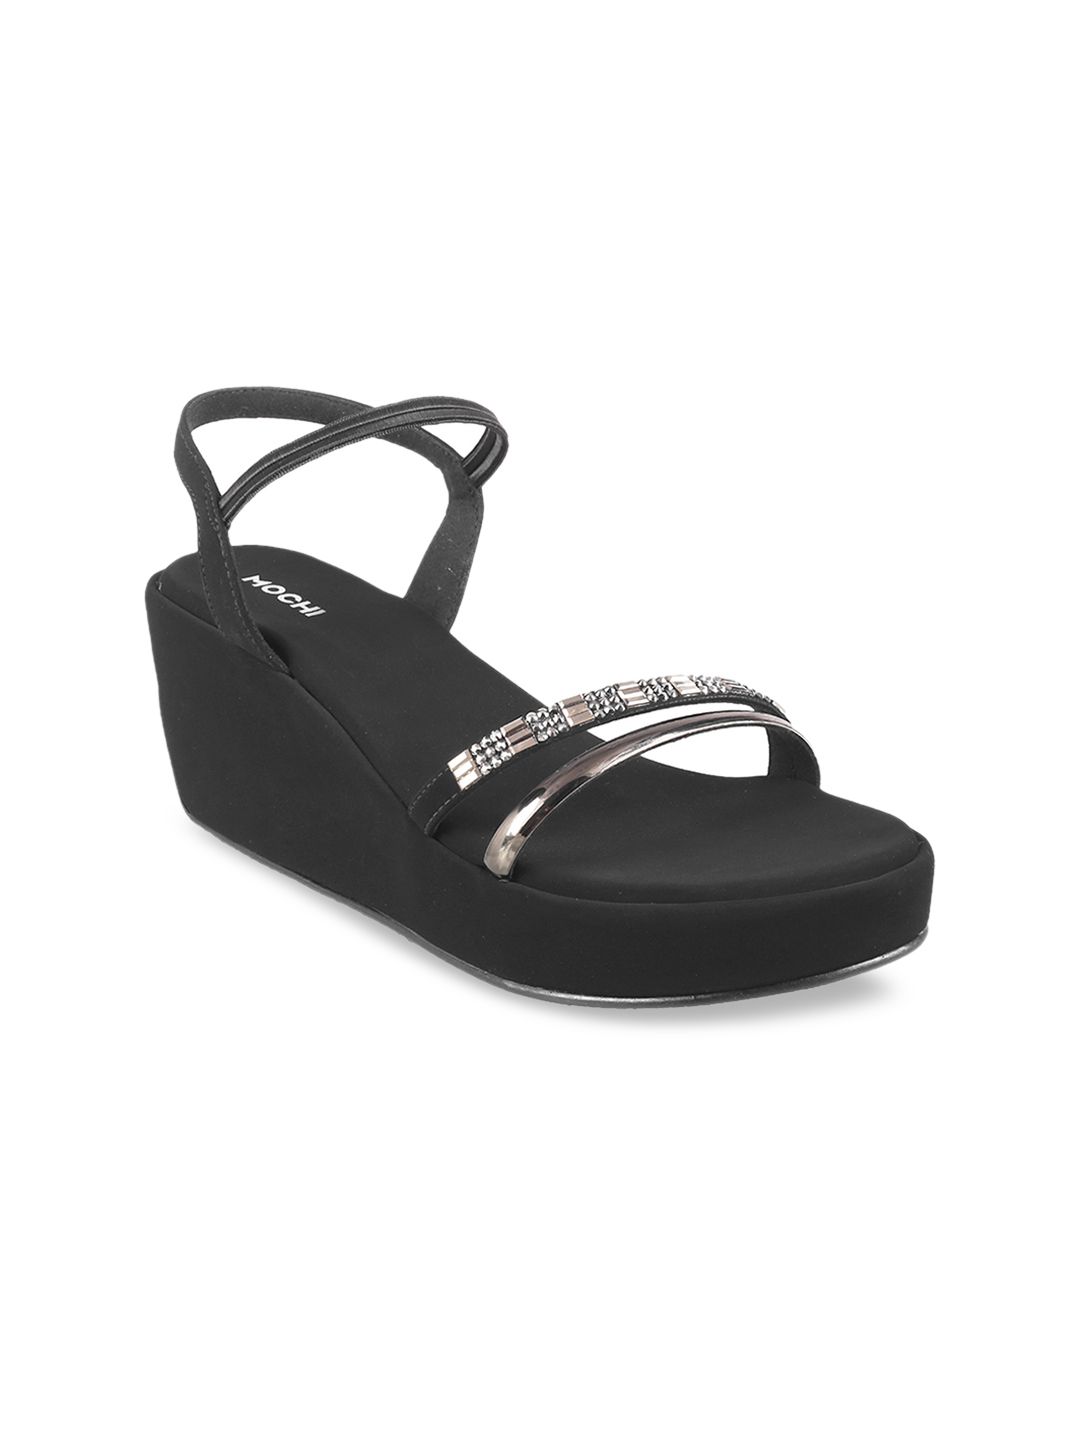 Mochi Women Silver-Toned Solid Sandals Price in India